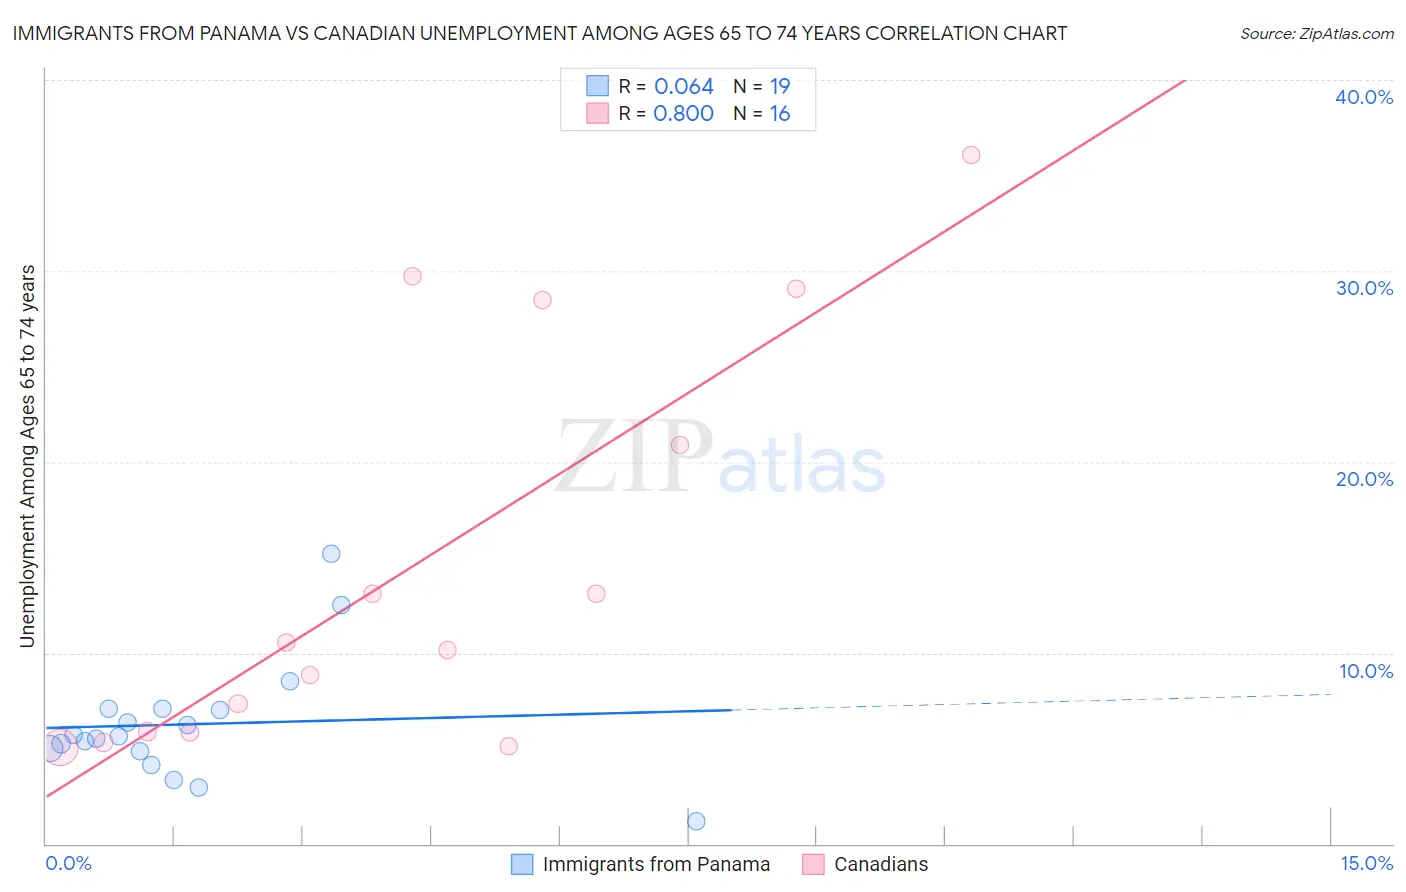 Immigrants from Panama vs Canadian Unemployment Among Ages 65 to 74 years